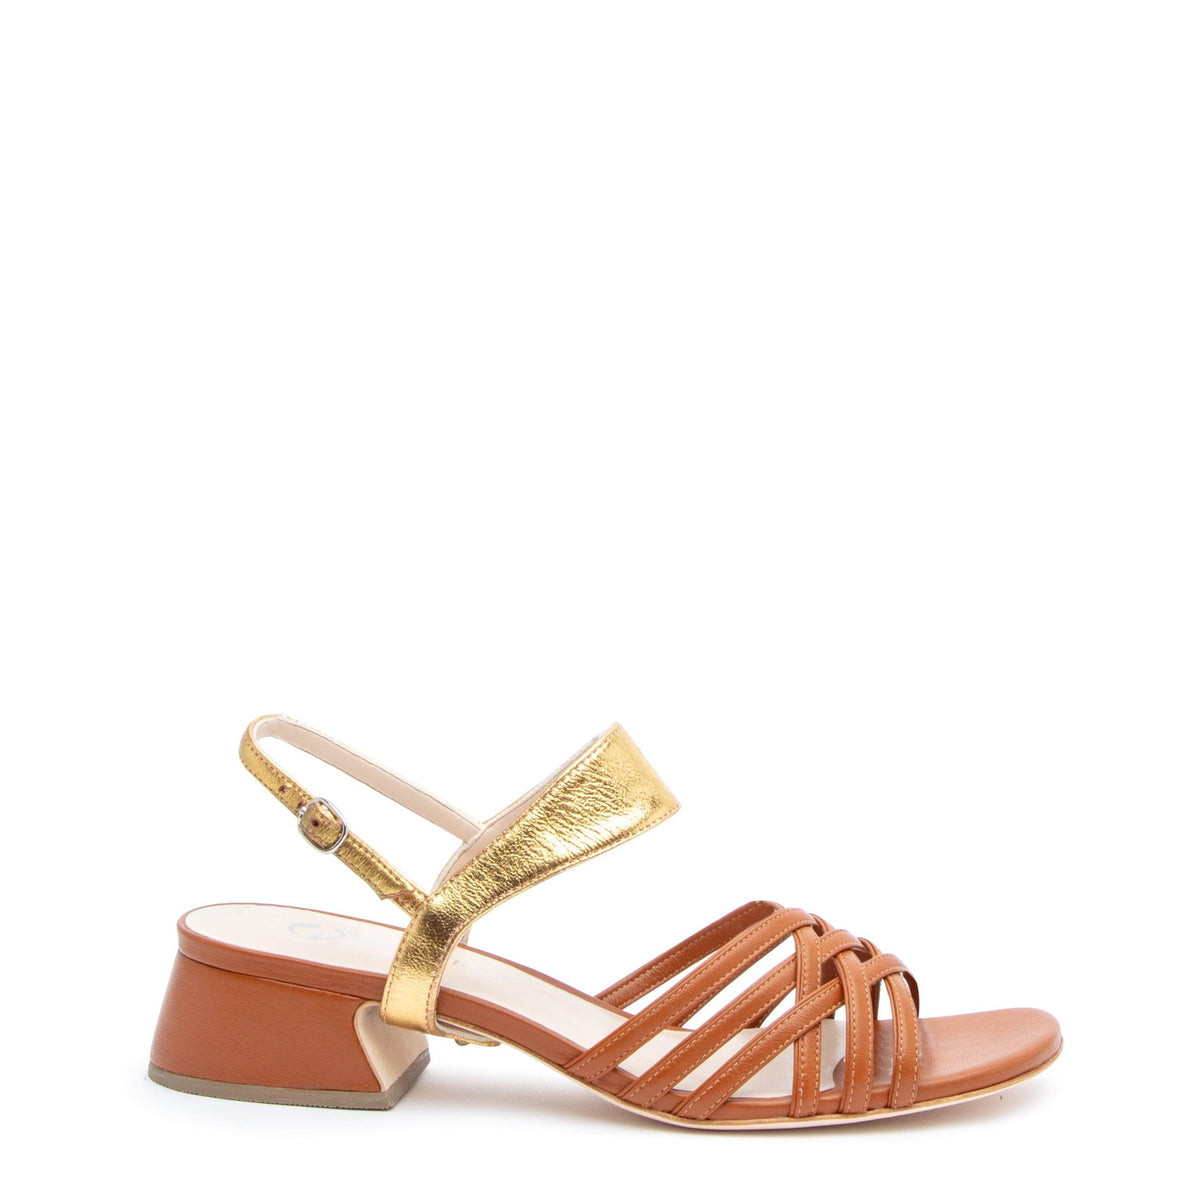 Cognac Bell Sandal + Gold Elsie Customized Sandals | Alterre Interchangeable Sandals - Sustainable Footwear & Ethical Shoes